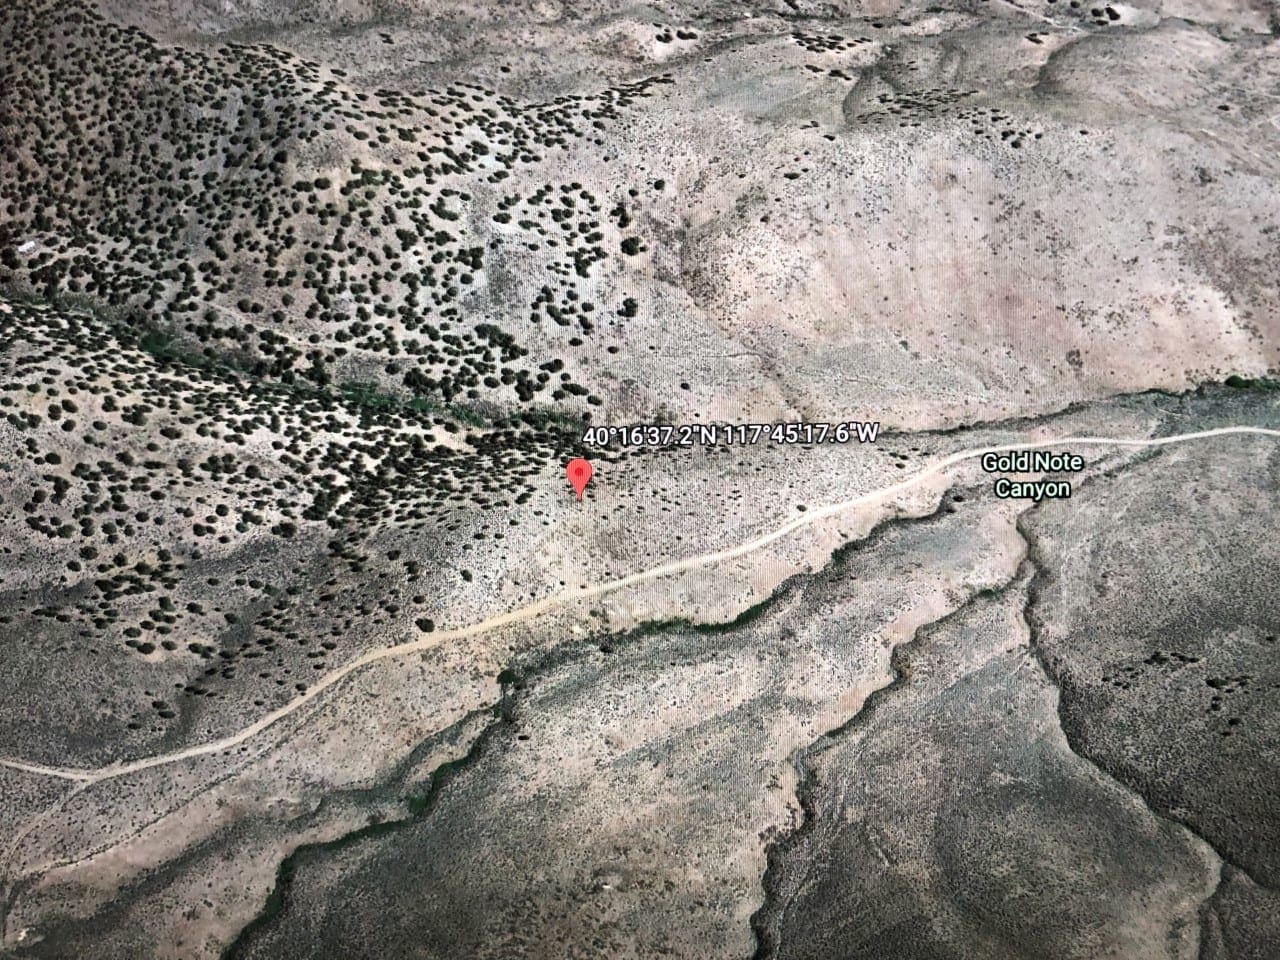 15.84 Acres in GOLD NOTE CANYON, HIDDEN TREASURE #1, SUR 2097 – A PATENTED MINING CLAIM -PAST PRODUCER OF GOLD, SILVER & ZINC photo 33